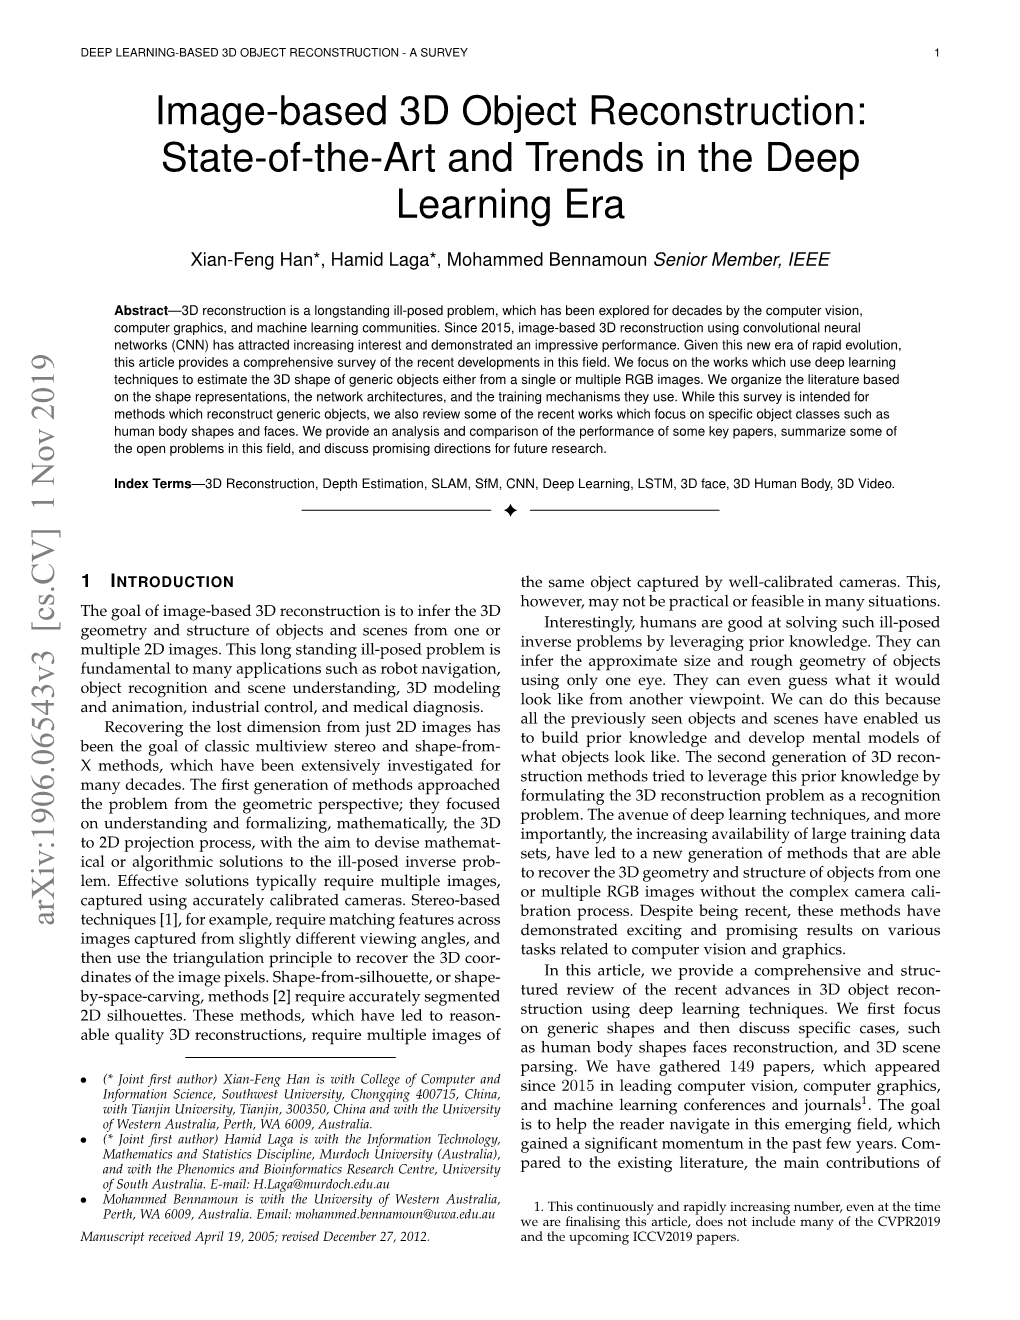 Image-Based 3D Object Reconstruction: State-Of-The-Art and Trends in the Deep Learning Era